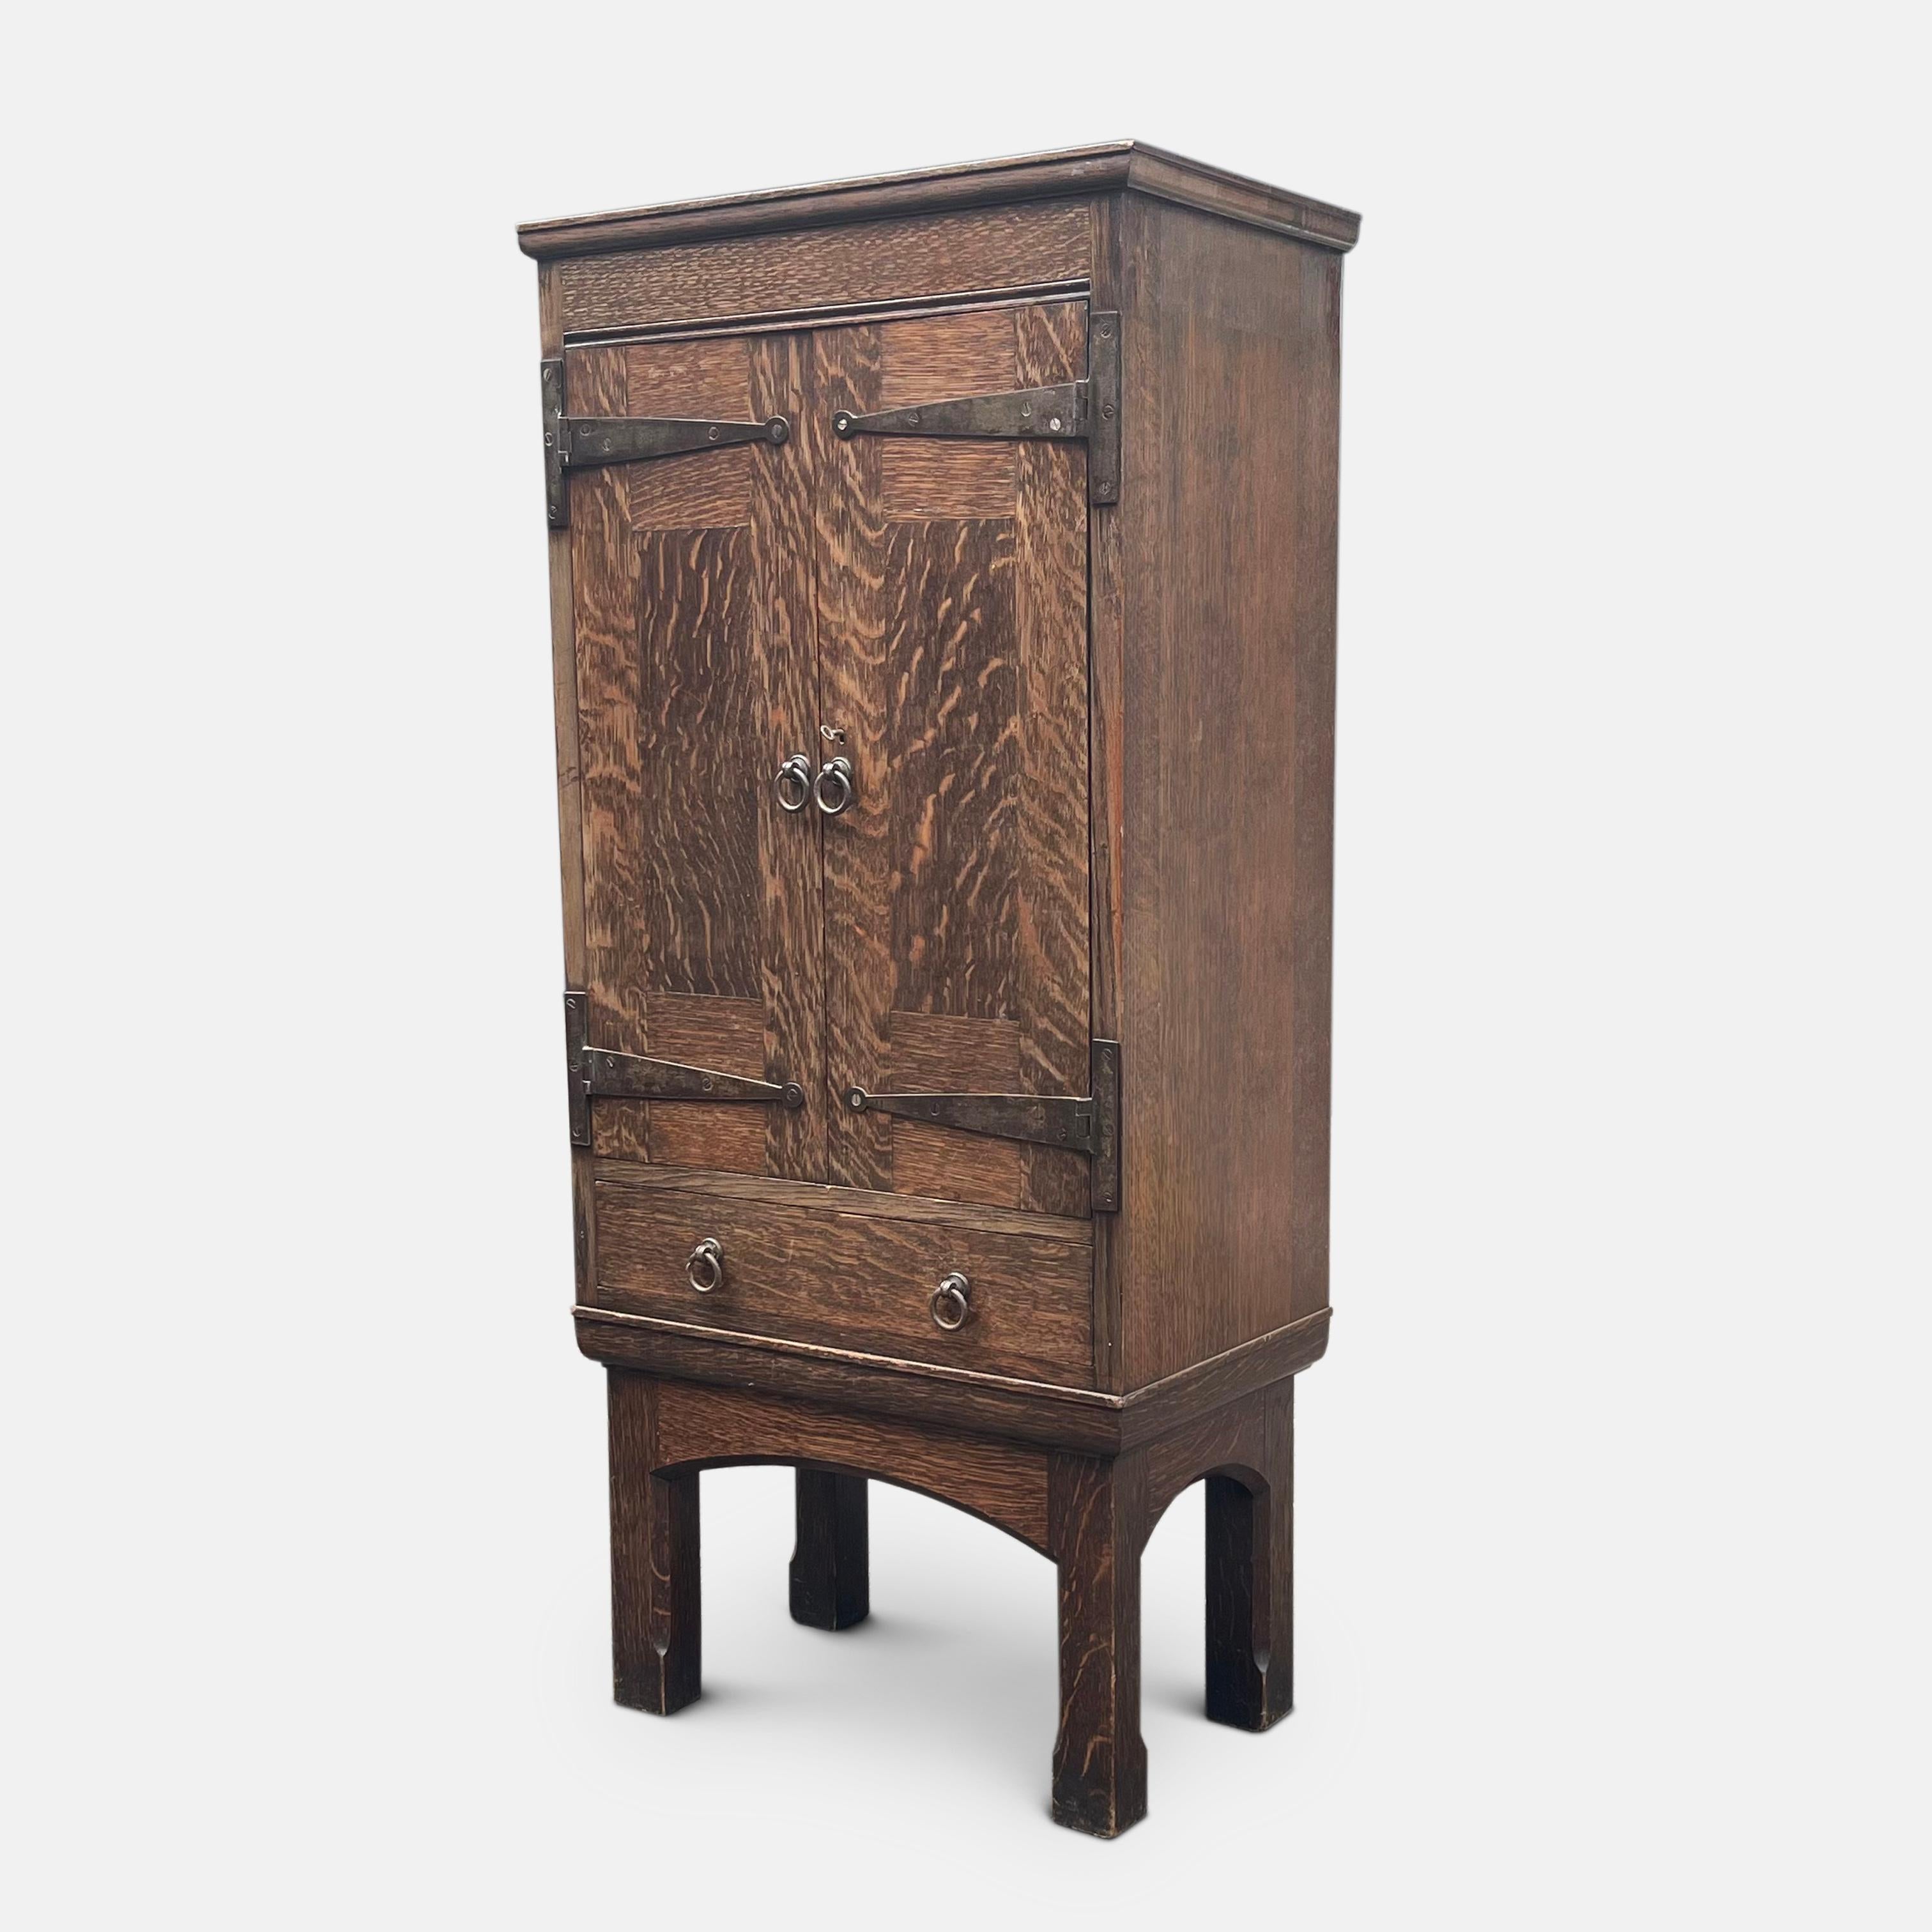 An early 20th century Liberty & Co oak cupboard attributed to Leonard Wyburd.

This piece is constructed from beautifully grained oak, enriched with hand hammered wrought iron escutcheons, circular drop handles and mounted over a frieze drawer,